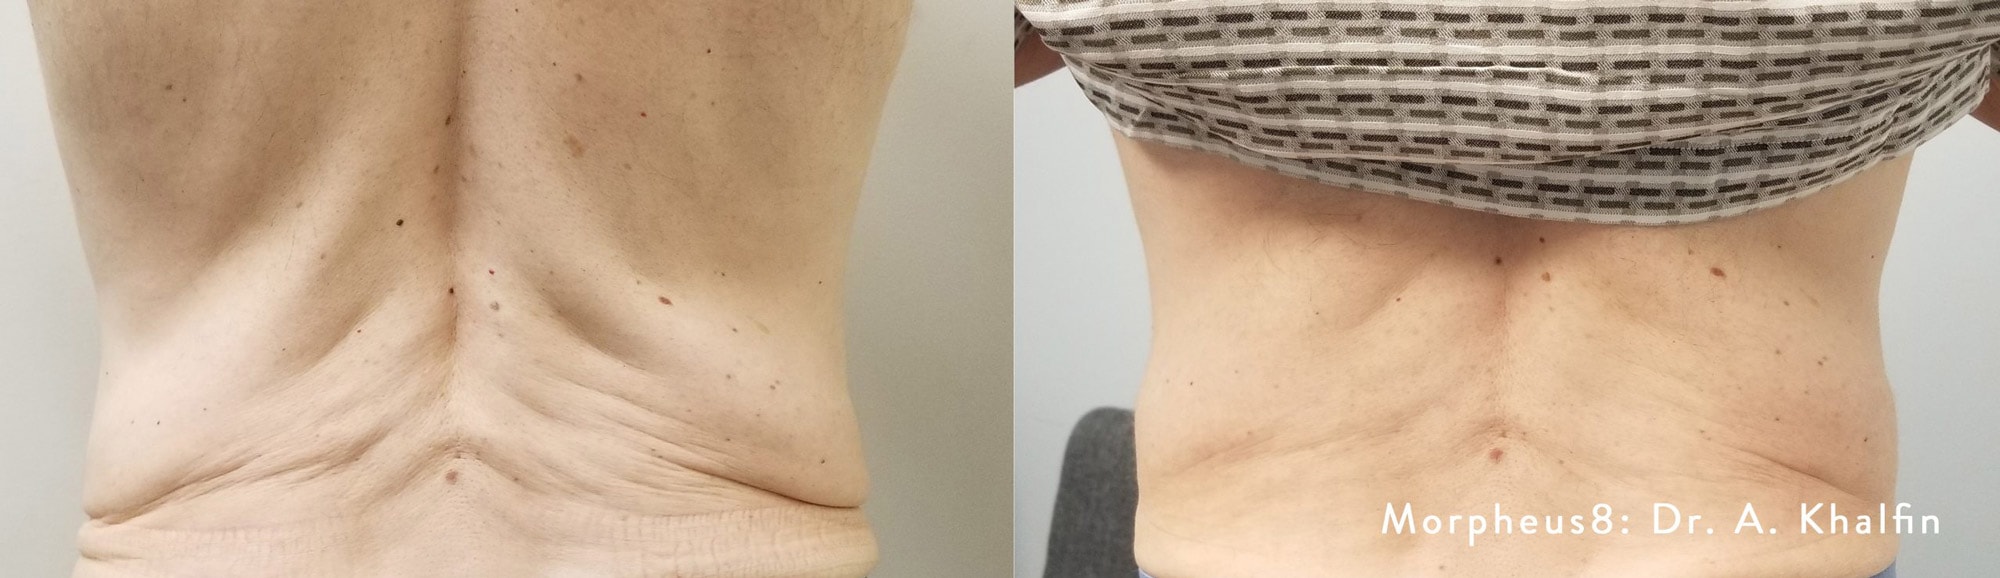 Before and After photos of Morpheus8 tightening loose skin and reducing deep wrinkles on a woman’s back